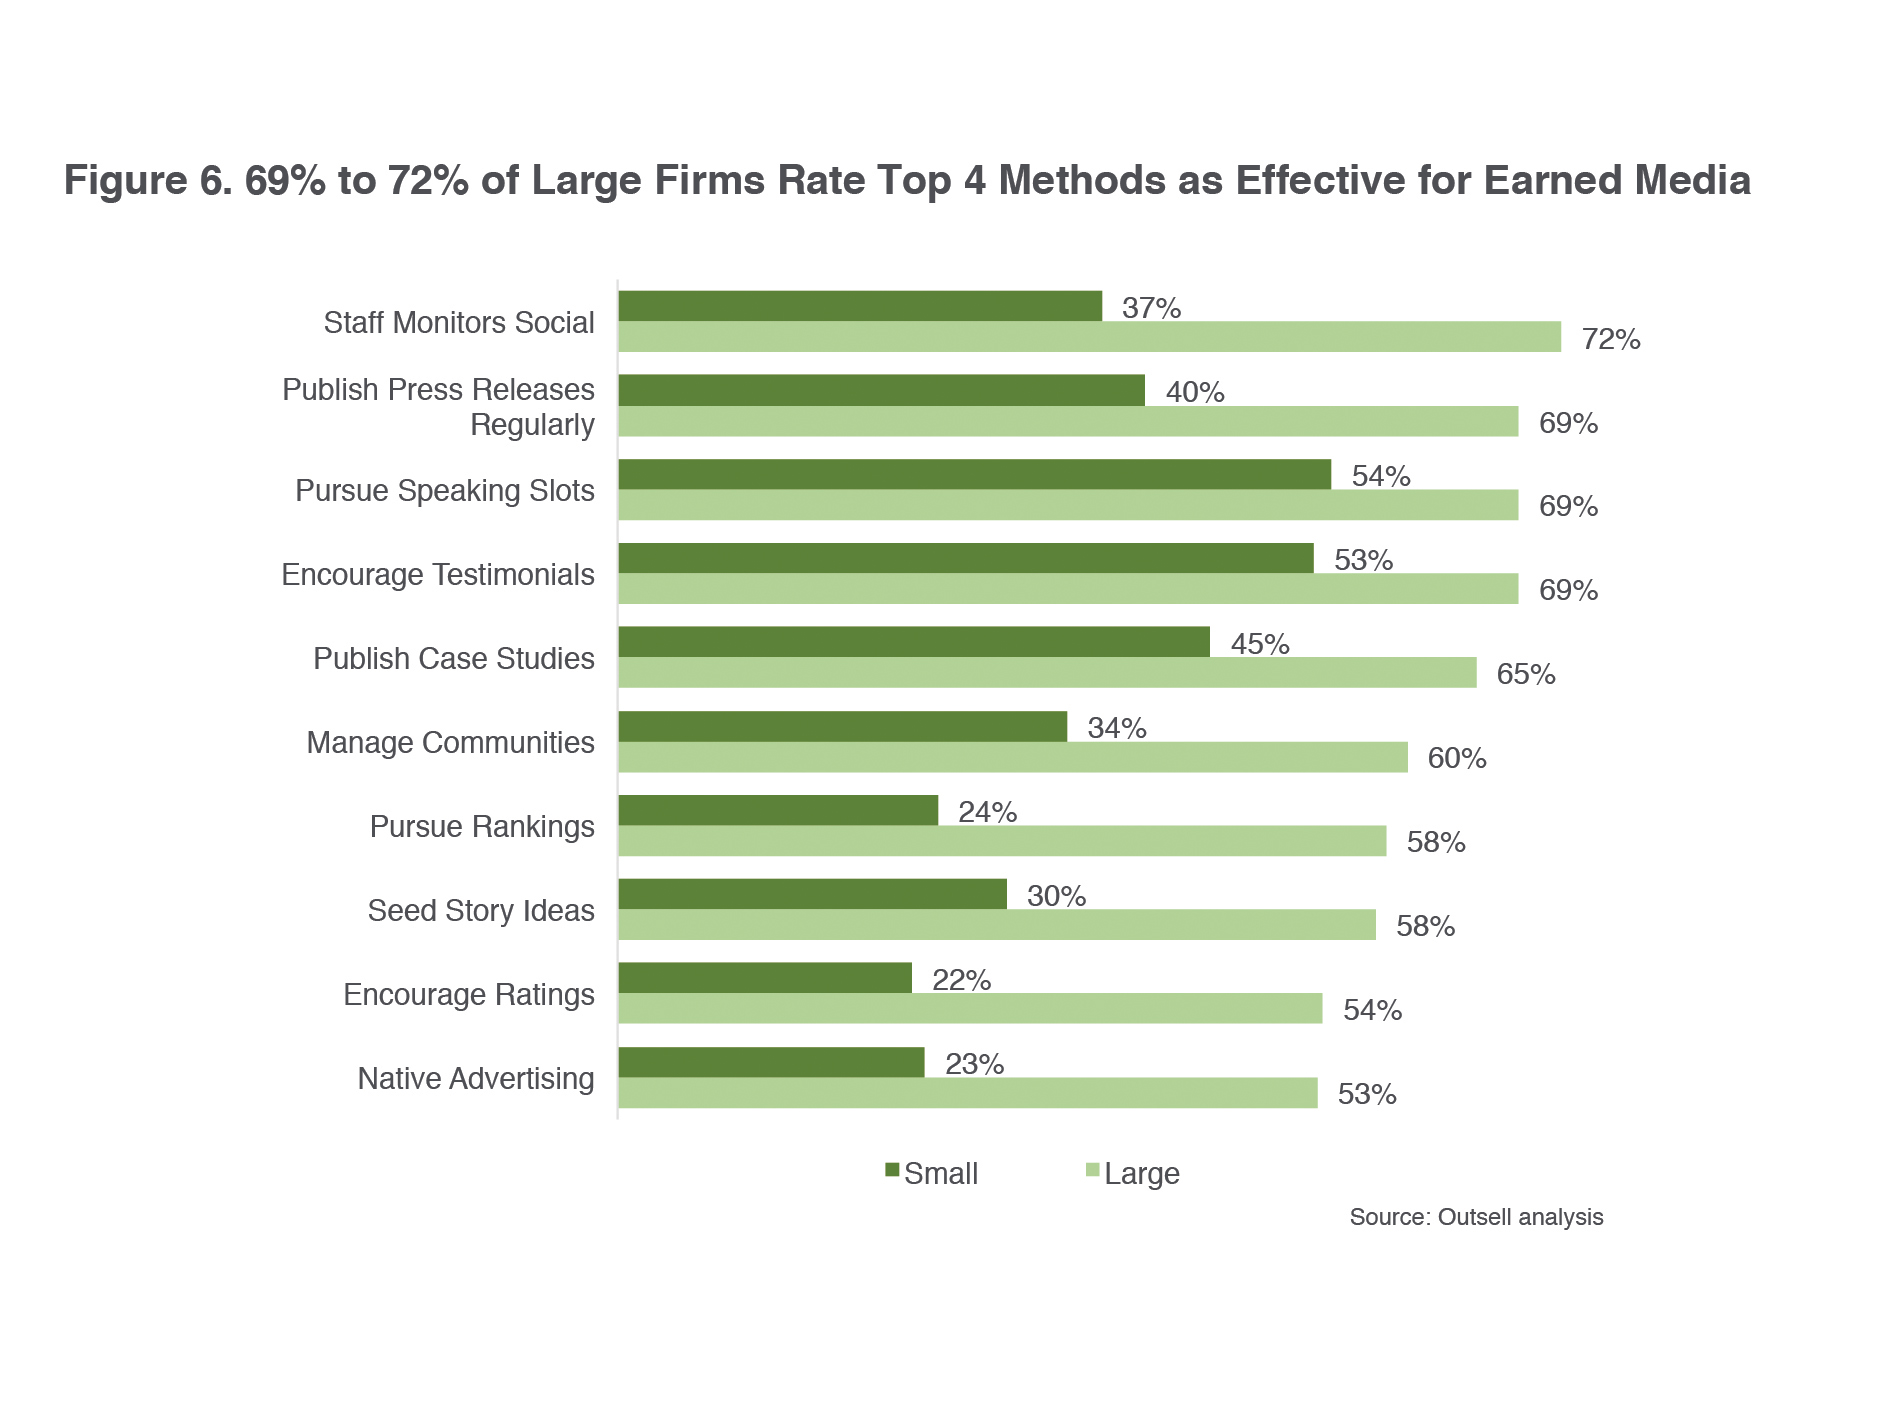 69% to 72% of Large Firms Rate Top 4 Methods as Effective for Earned Media.